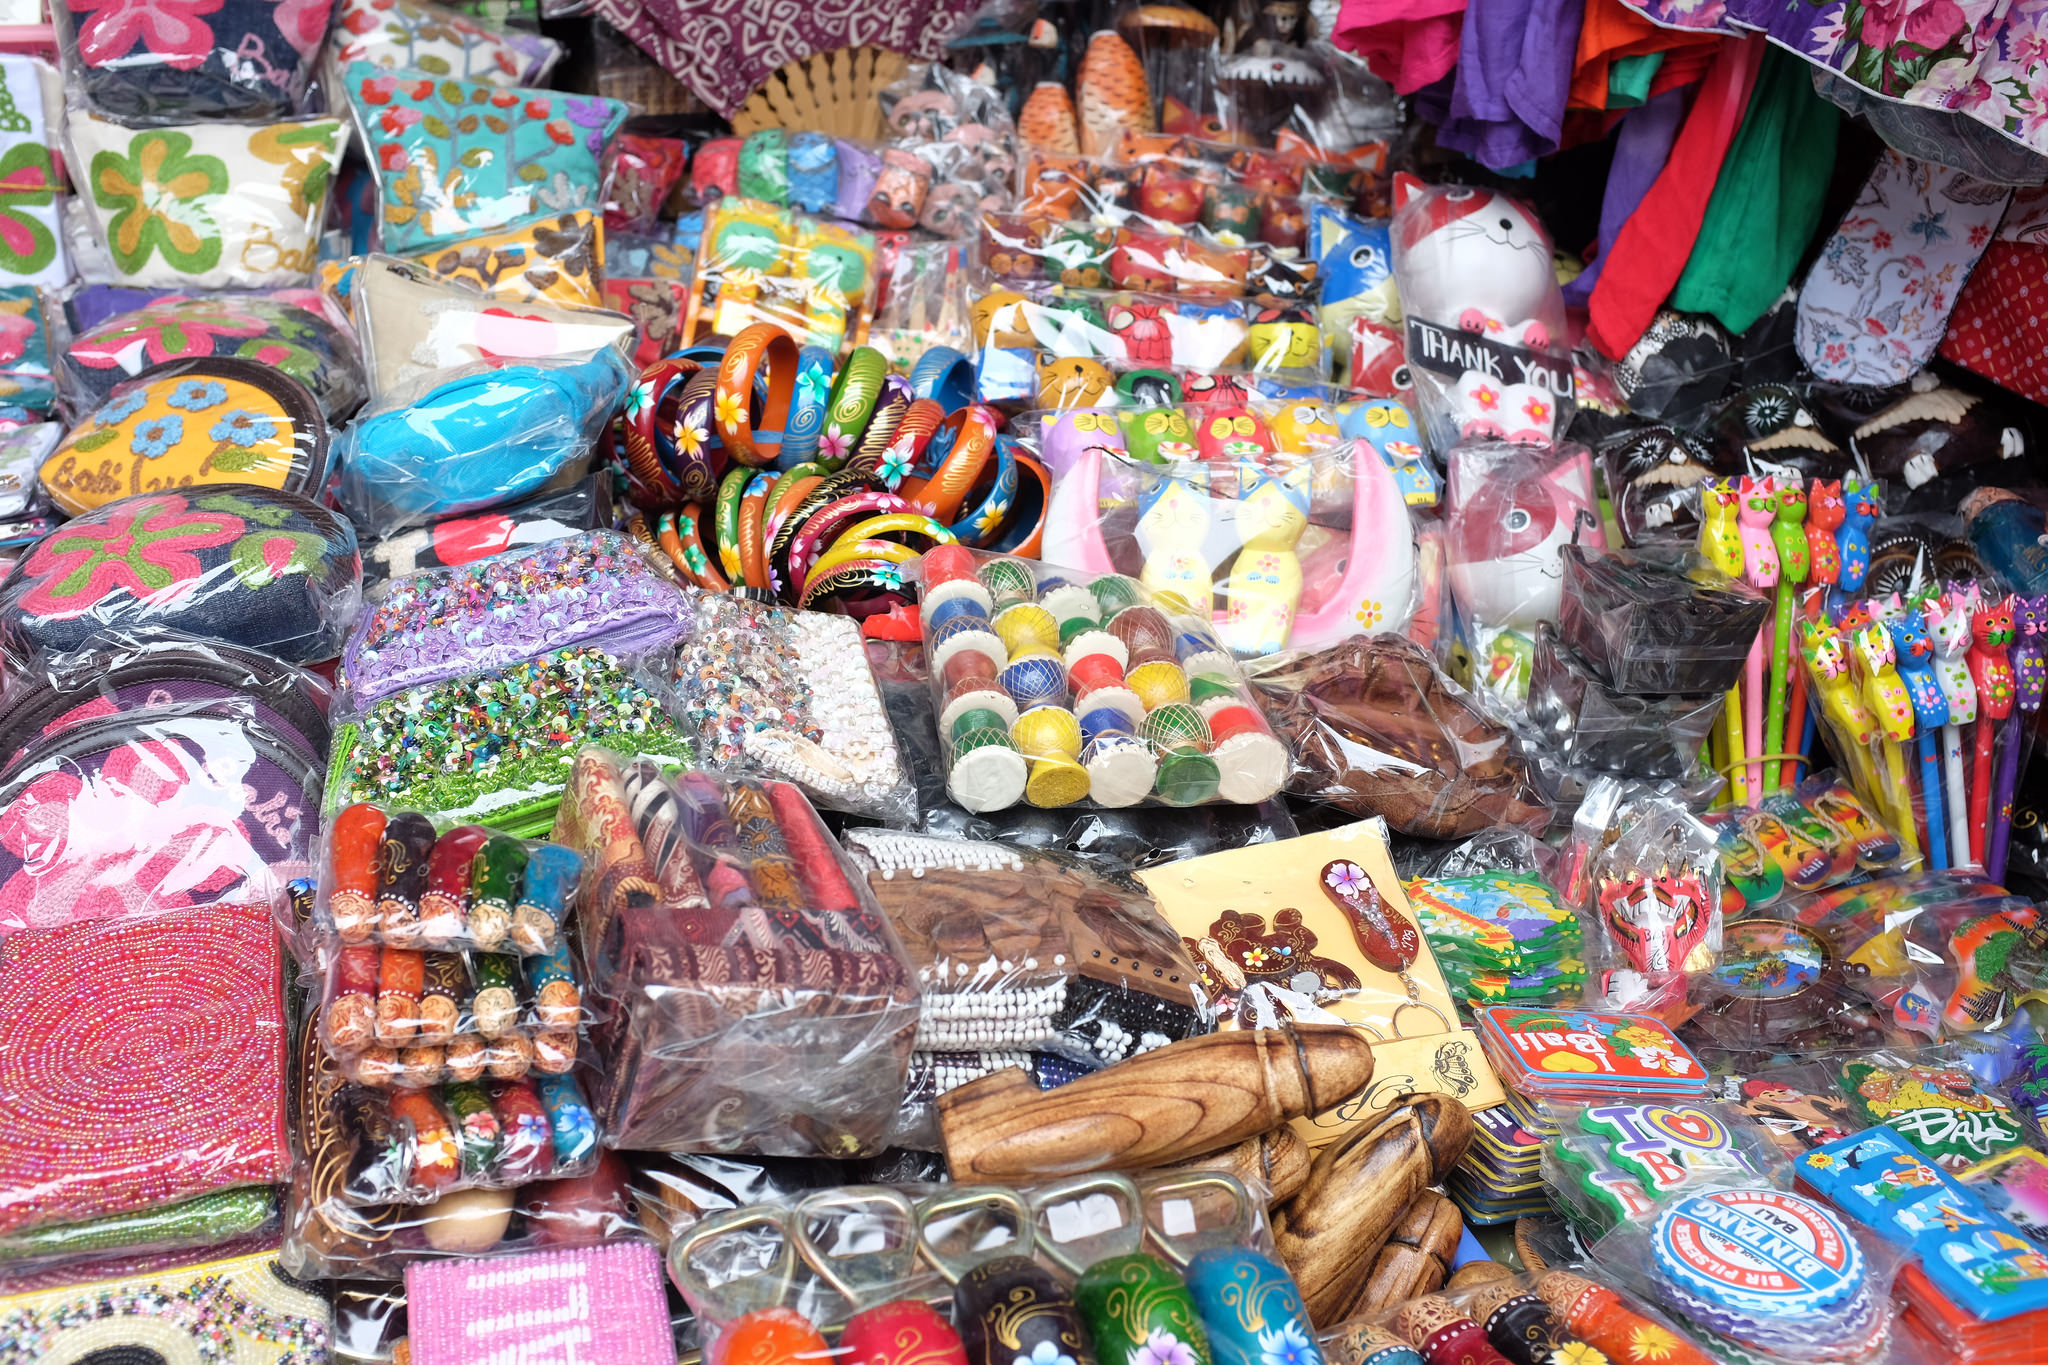 ULTIMATE BALI SHOPPING PRICES GUIDE FOR SHOPPING IN BALI